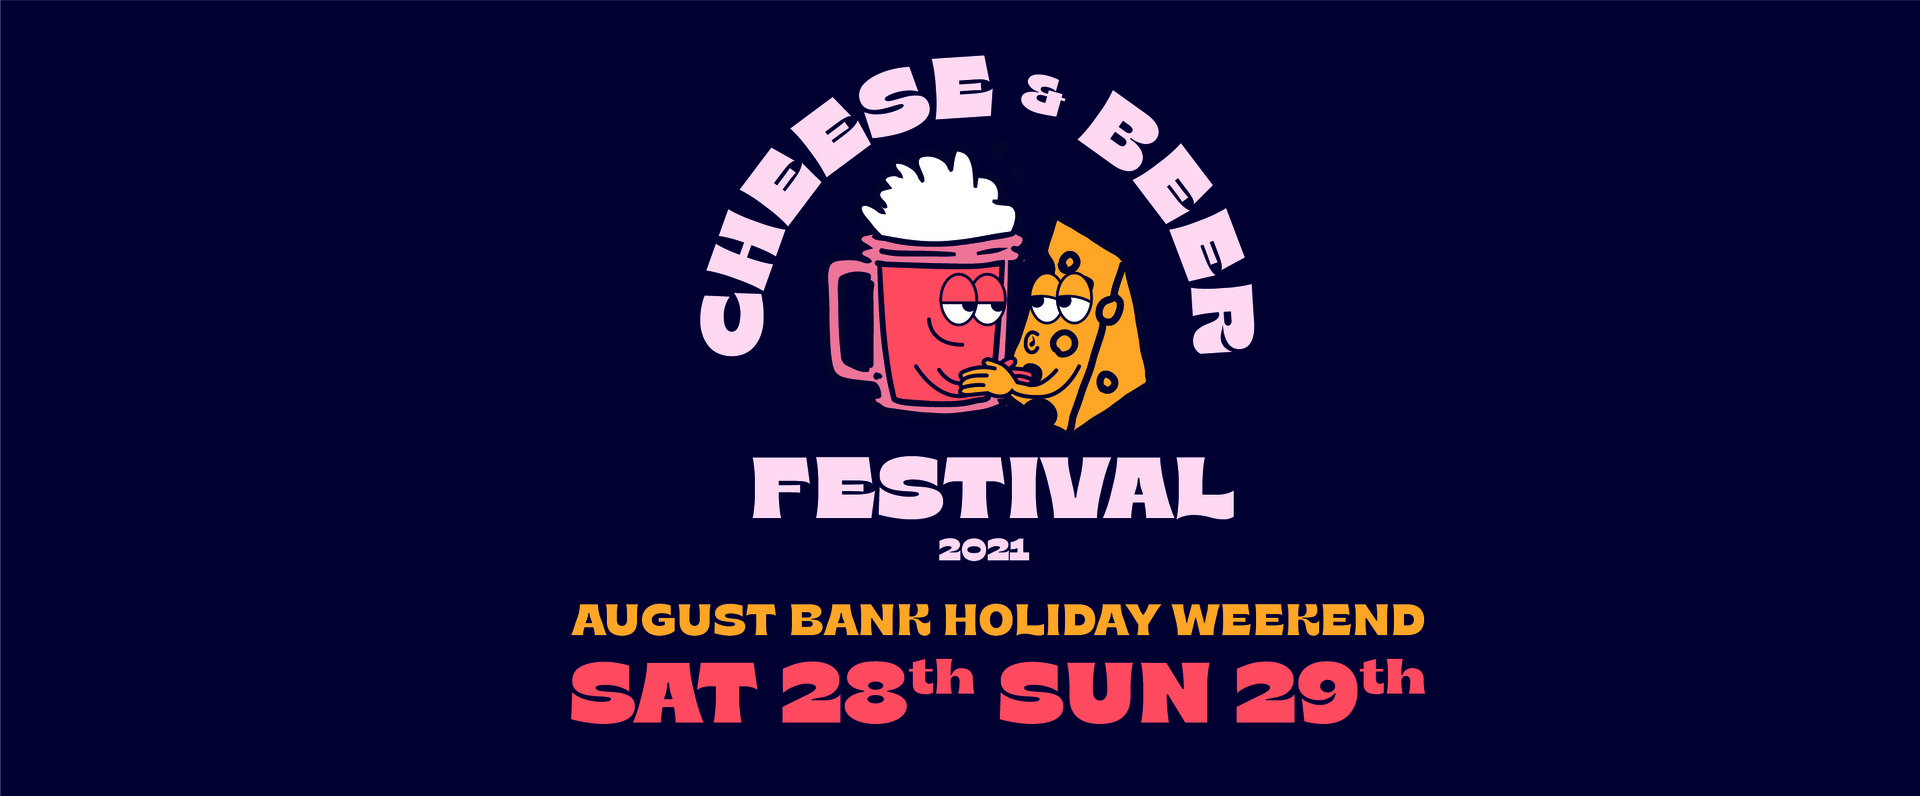 Cheese and Beer festival, London, England, United Kingdom